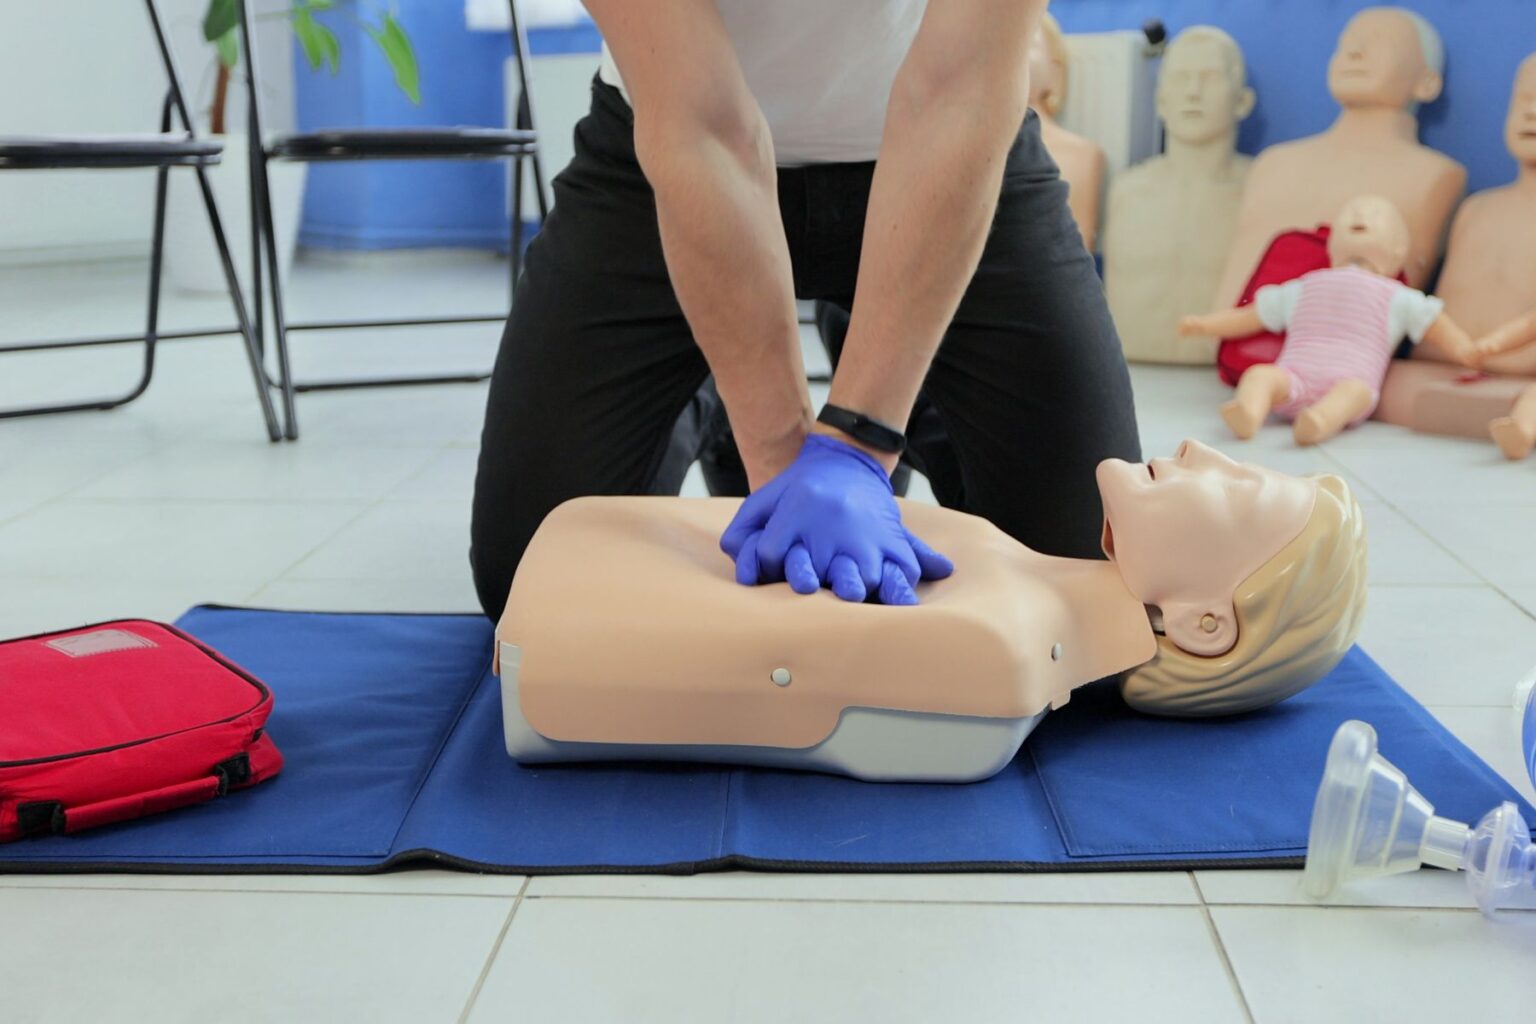 First aid cpr lesson